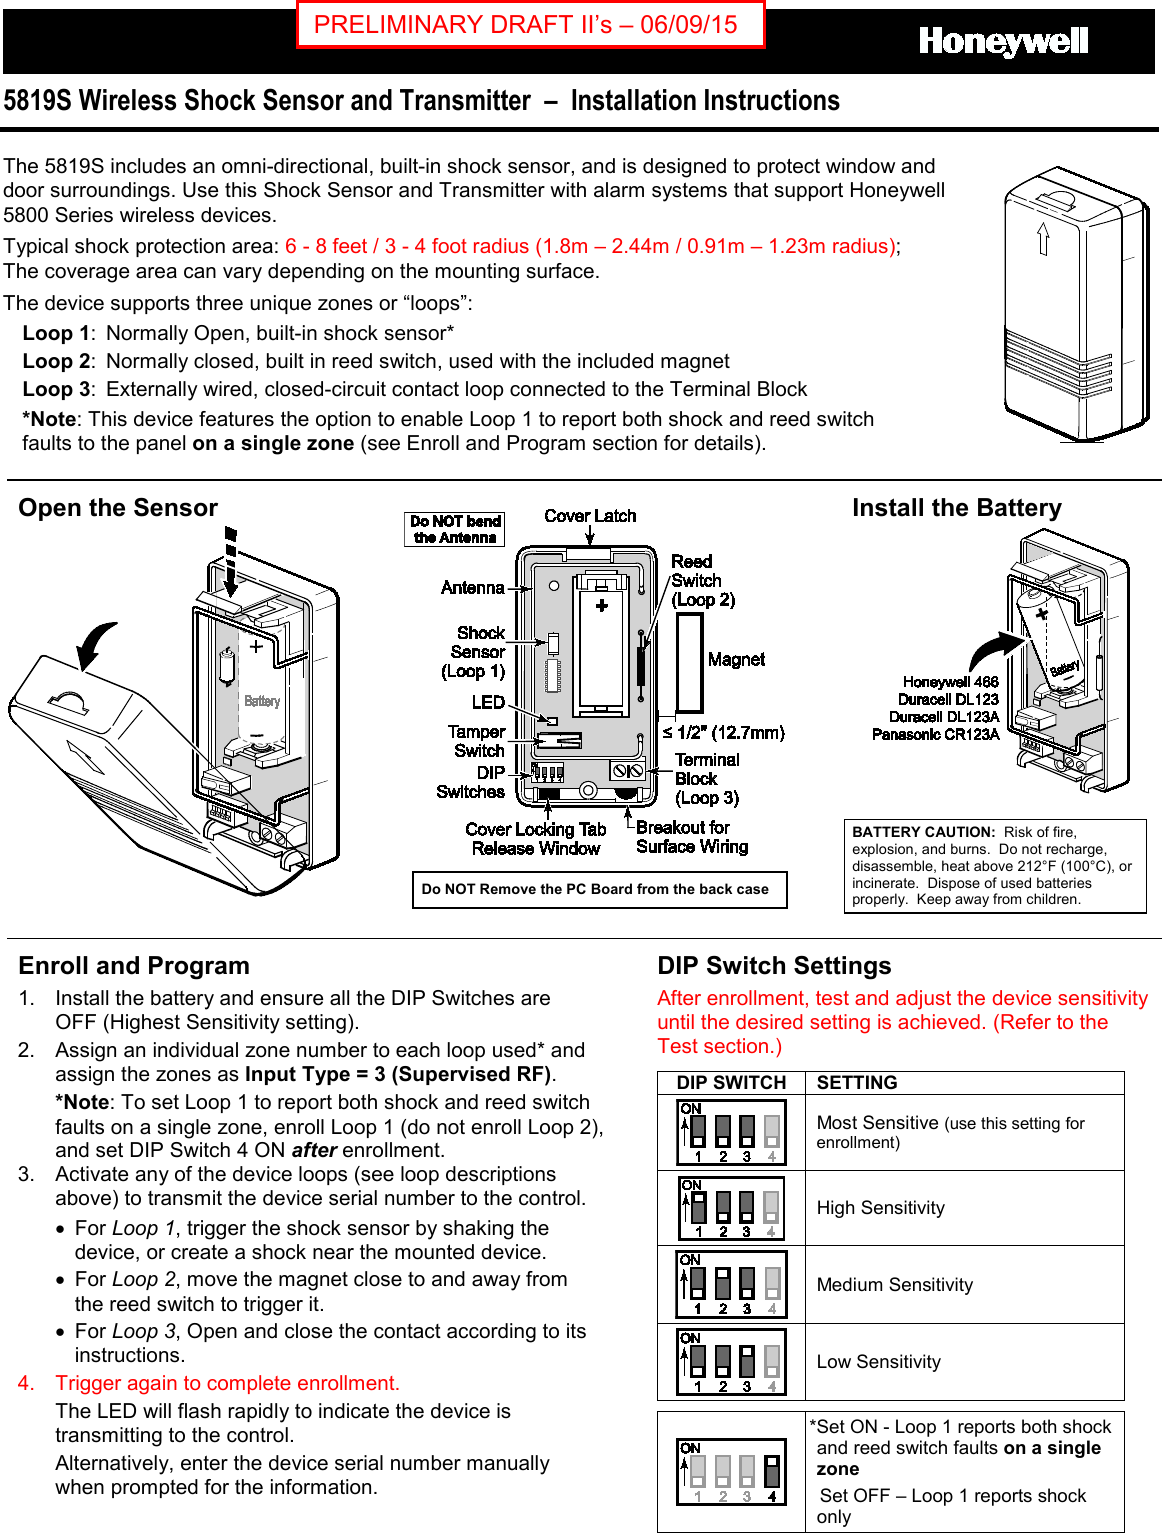   5819S Wireless Shock Sensor and Transmitter  –  Installation Instructions  The 5819S includes an omni-directional, built-in shock sensor, and is designed to protect window and door surroundings. Use this Shock Sensor and Transmitter with alarm systems that support Honeywell 5800 Series wireless devices.  Typical shock protection area: 6 - 8 feet / 3 - 4 foot radius (1.8m – 2.44m / 0.91m – 1.23m radius); The coverage area can vary depending on the mounting surface. The device supports three unique zones or “loops”: Loop 1:  Normally Open, built-in shock sensor* Loop 2:  Normally closed, built in reed switch, used with the included magnet Loop 3:  Externally wired, closed-circuit contact loop connected to the Terminal Block *Note: This device features the option to enable Loop 1 to report both shock and reed switch  faults to the panel on a single zone (see Enroll and Program section for details).  Open the Sensor    Install the Battery   BATTERY CAUTION:  Risk of fire, explosion, and burns.  Do not recharge, disassemble, heat above 212°F (100°C), or incinerate.  Dispose of used batteries properly.  Keep away from children. Enroll and Program 1. Install the battery and ensure all the DIP Switches are OFF (Highest Sensitivity setting).   2. Assign an individual zone number to each loop used* and assign the zones as Input Type = 3 (Supervised RF). *Note: To set Loop 1 to report both shock and reed switch faults on a single zone, enroll Loop 1 (do not enroll Loop 2), and set DIP Switch 4 ON after enrollment. 3. Activate any of the device loops (see loop descriptions above) to transmit the device serial number to the control.   • For Loop 1, trigger the shock sensor by shaking the device, or create a shock near the mounted device. • For Loop 2, move the magnet close to and away from the reed switch to trigger it.  • For Loop 3, Open and close the contact according to its instructions.  4. Trigger again to complete enrollment. The LED will flash rapidly to indicate the device is transmitting to the control.  Alternatively, enter the device serial number manually when prompted for the information. DIP Switch Settings After enrollment, test and adjust the device sensitivity until the desired setting is achieved. (Refer to the Test section.) DIP SWITCH SETTING  Most Sensitive (use this setting for enrollment)  High Sensitivity  Medium Sensitivity  Low Sensitivity   *Set ON - Loop 1 reports both shock and reed switch faults on a single zone   Set OFF – Loop 1 reports shock only   Do NOT Remove the PC Board from the back case PRELIMINARY DRAFT II’s – 06/09/15 